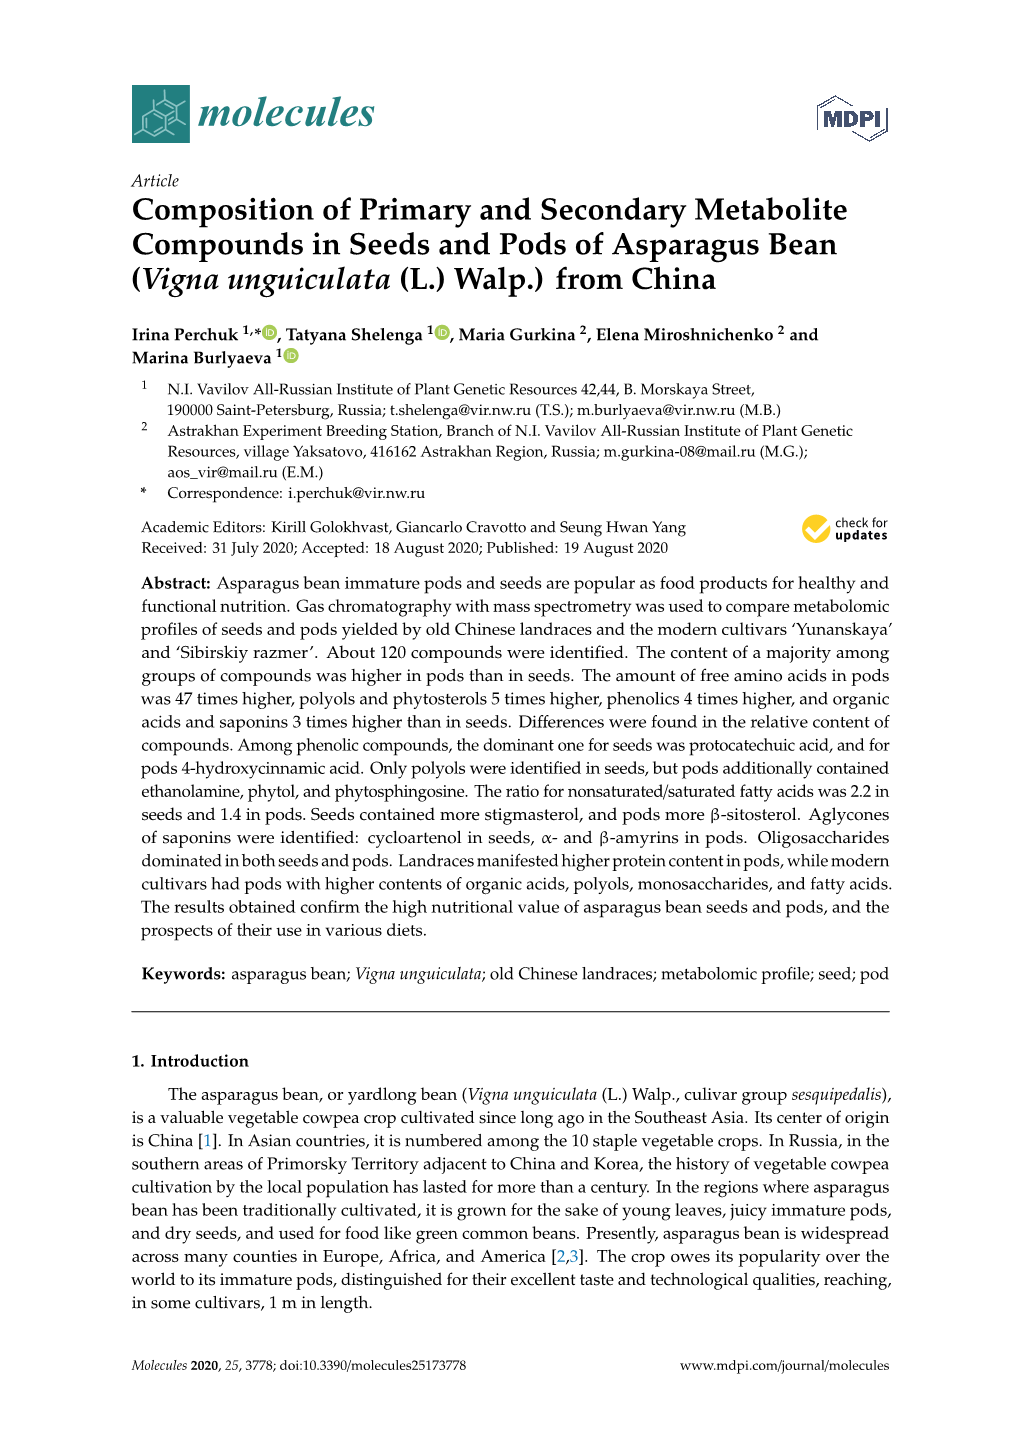 Composition of Primary and Secondary Metabolite Compounds in Seeds and Pods of Asparagus Bean (Vigna Unguiculata (L.) Walp.) from China